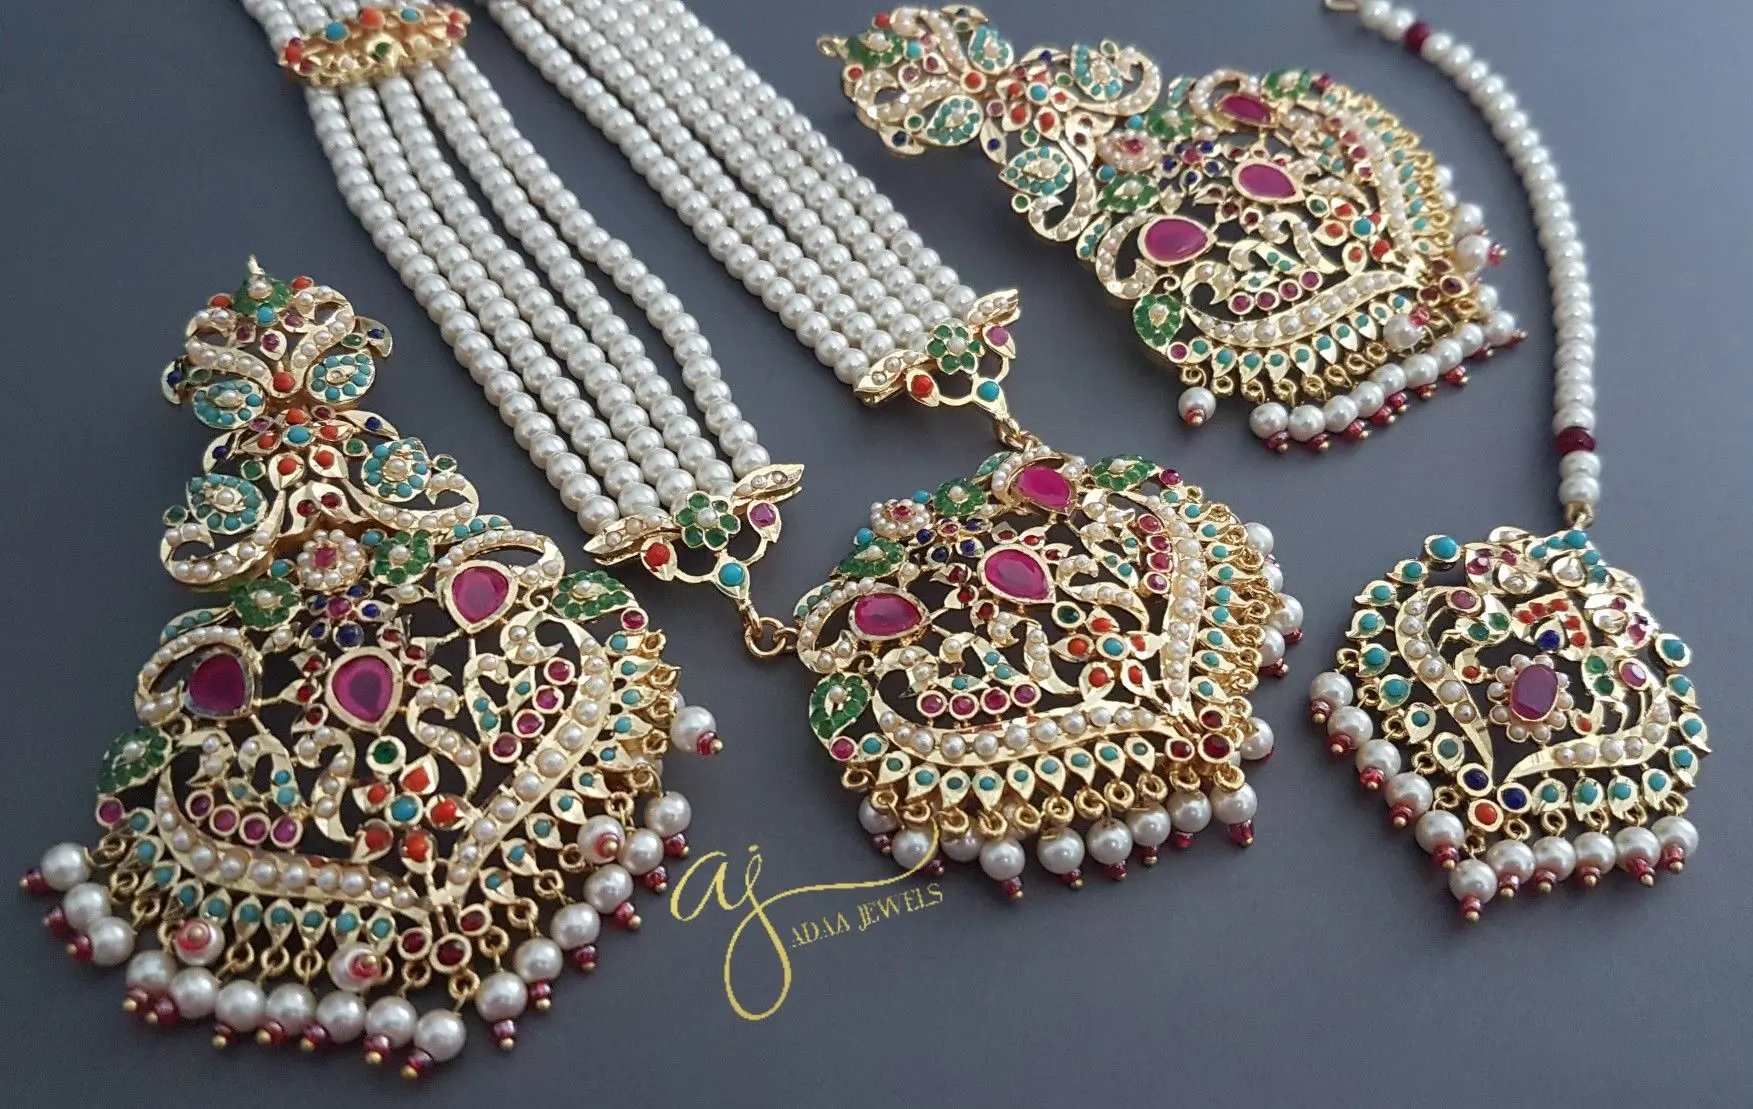 History of Indian Jewellery Change and Progress5  - History of Indian Jewellery Change and Progress5 - Indian Jewellery Through History: Changing to Constant